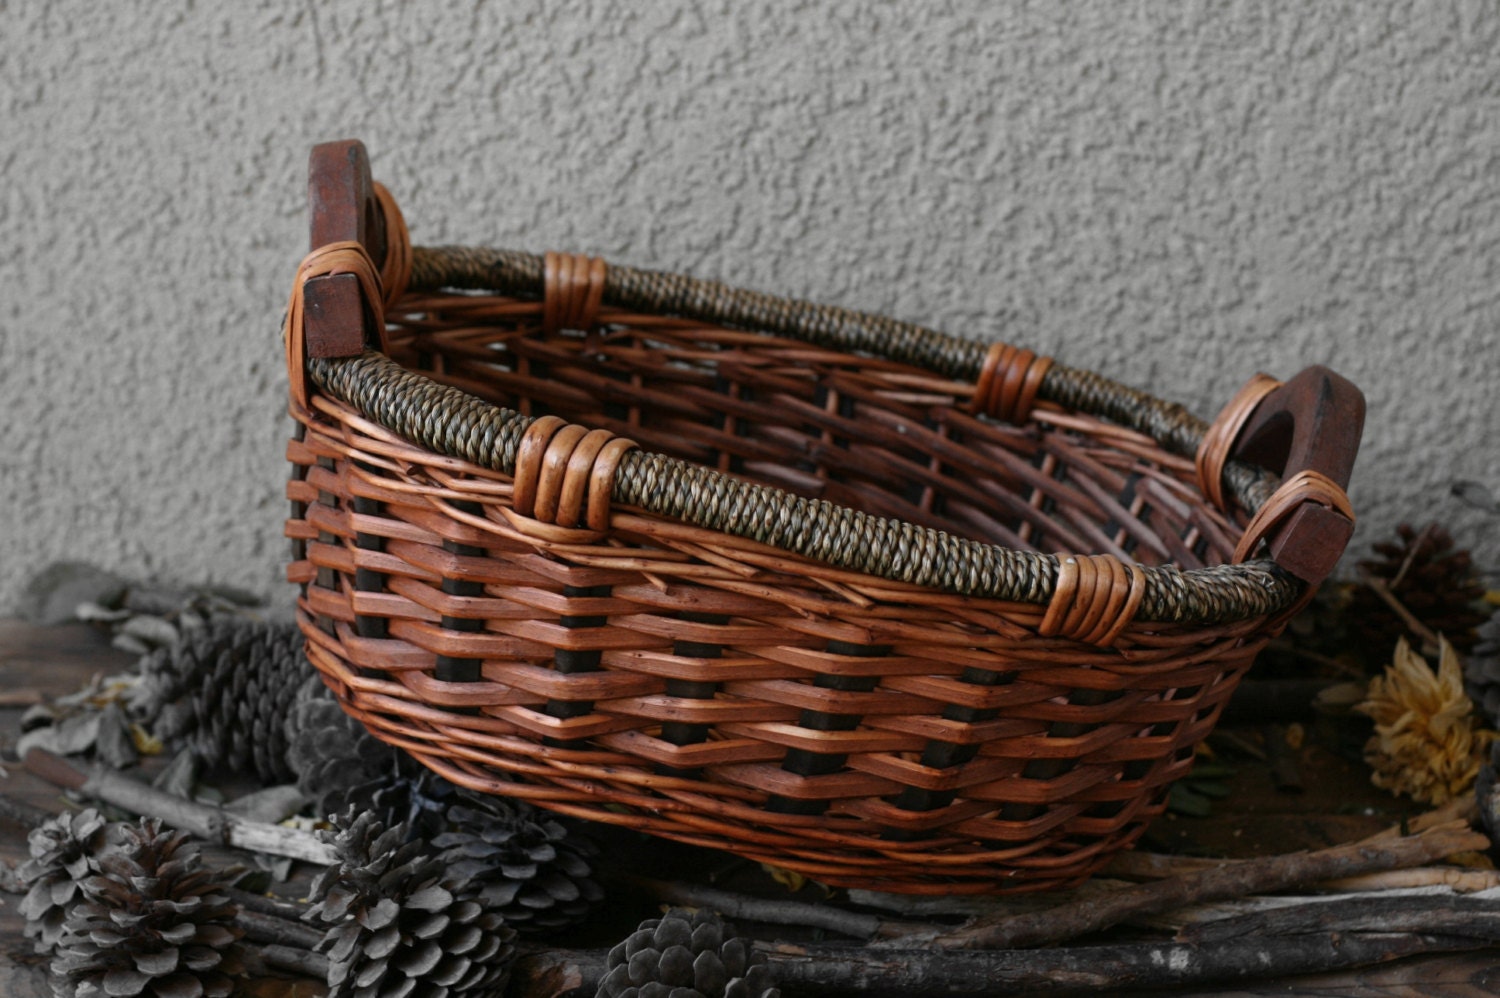 Vintage Oval Wicker Basket With Wood Handles Willow Woven Basket